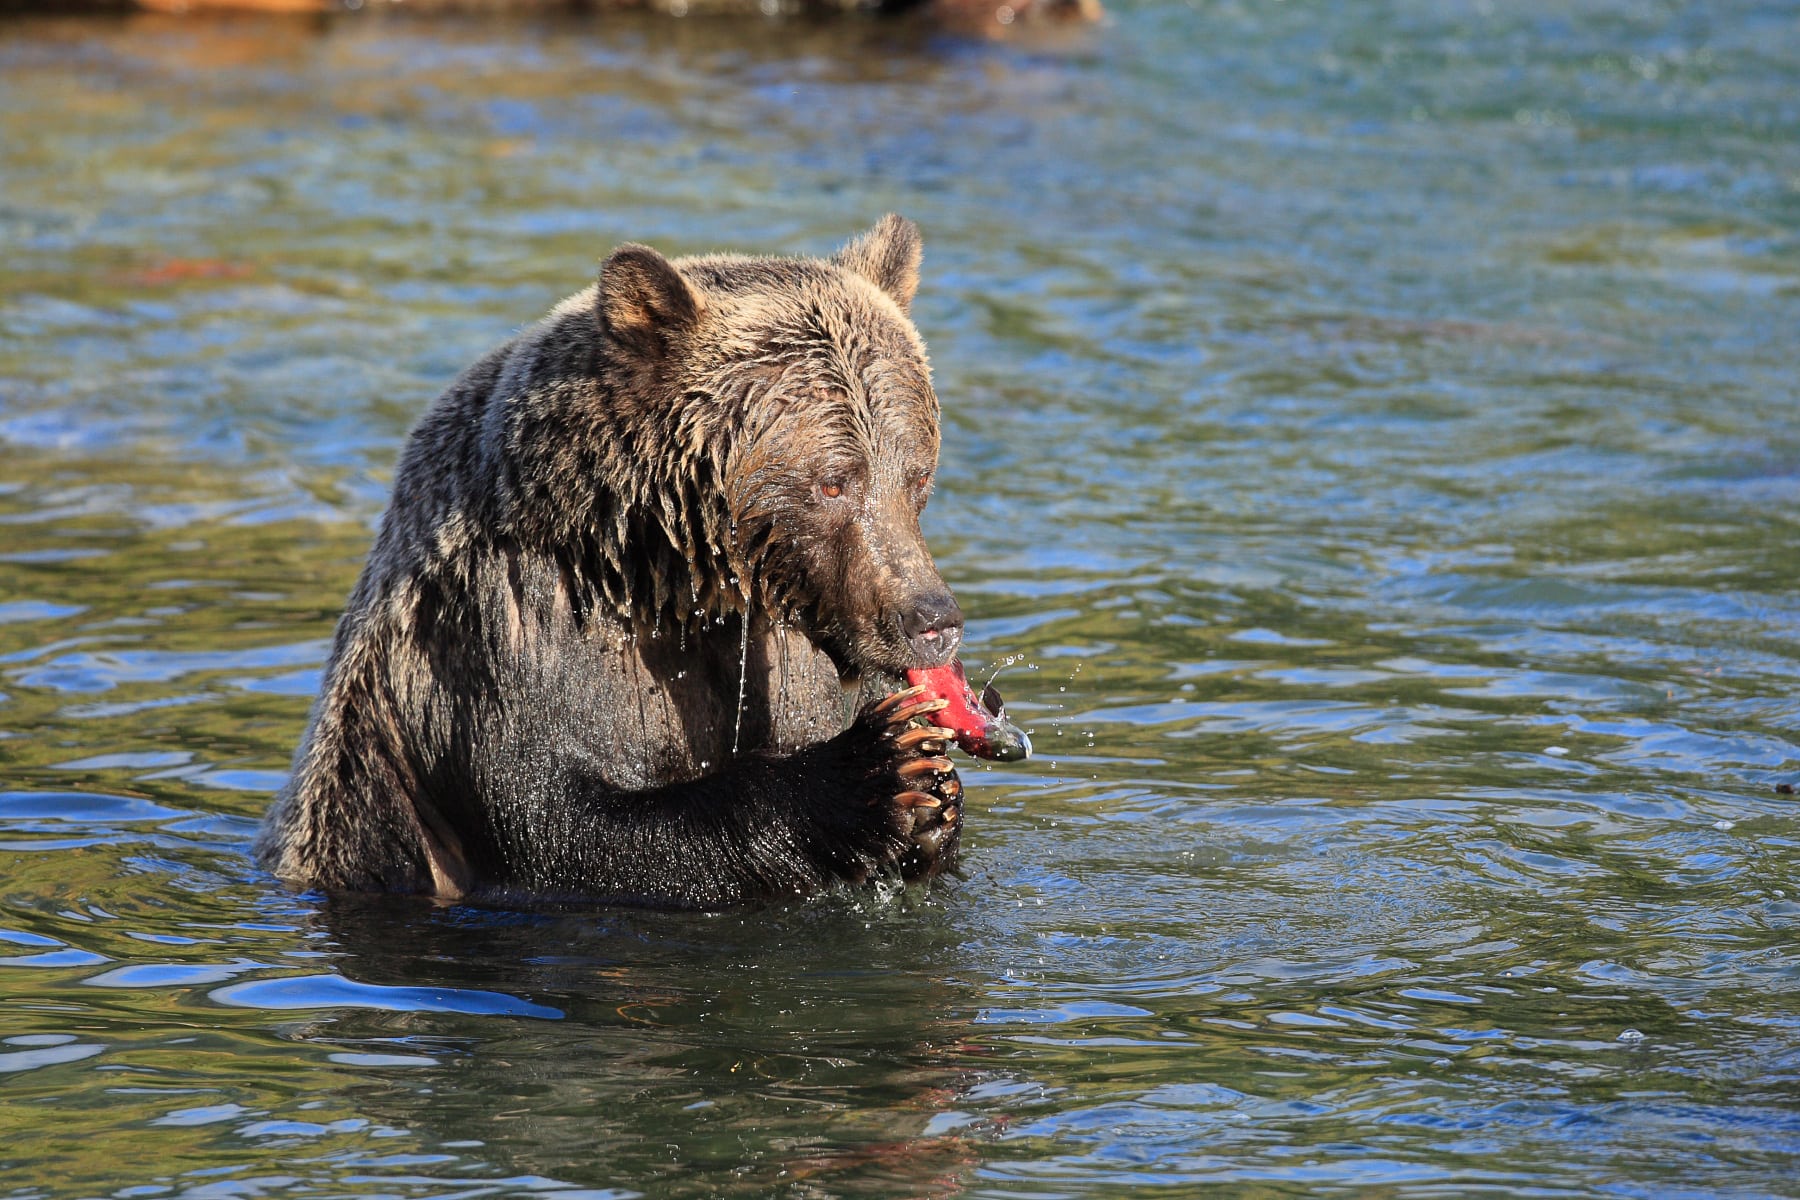 A grizzly bear eating a fish at Wild Bear Lodge